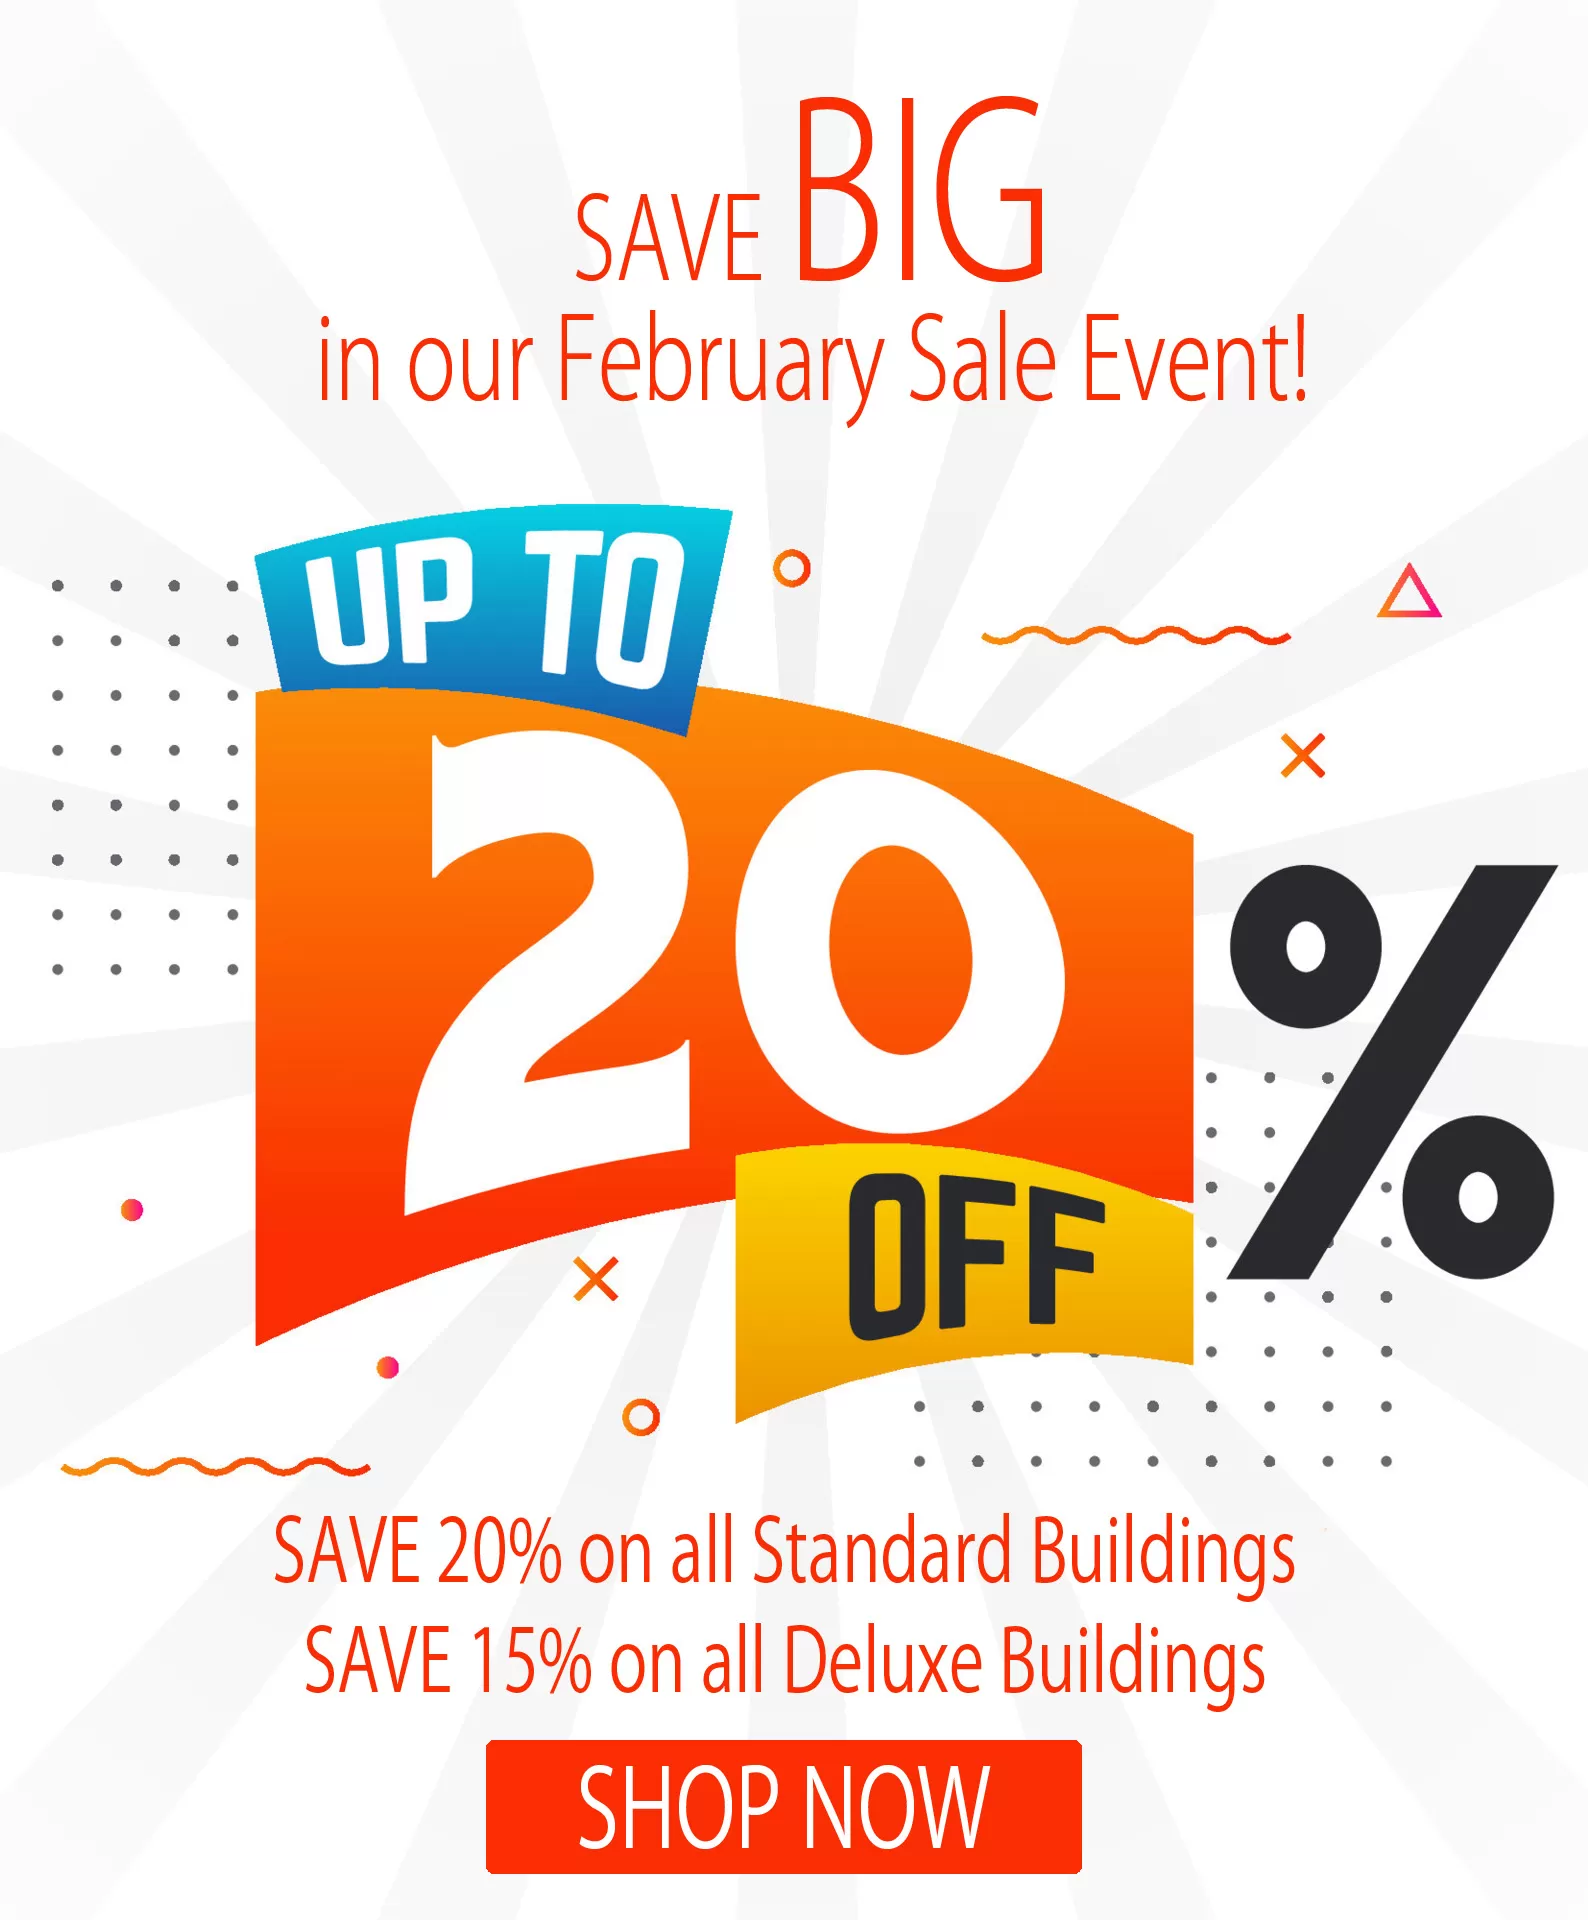 Save Up To 20%